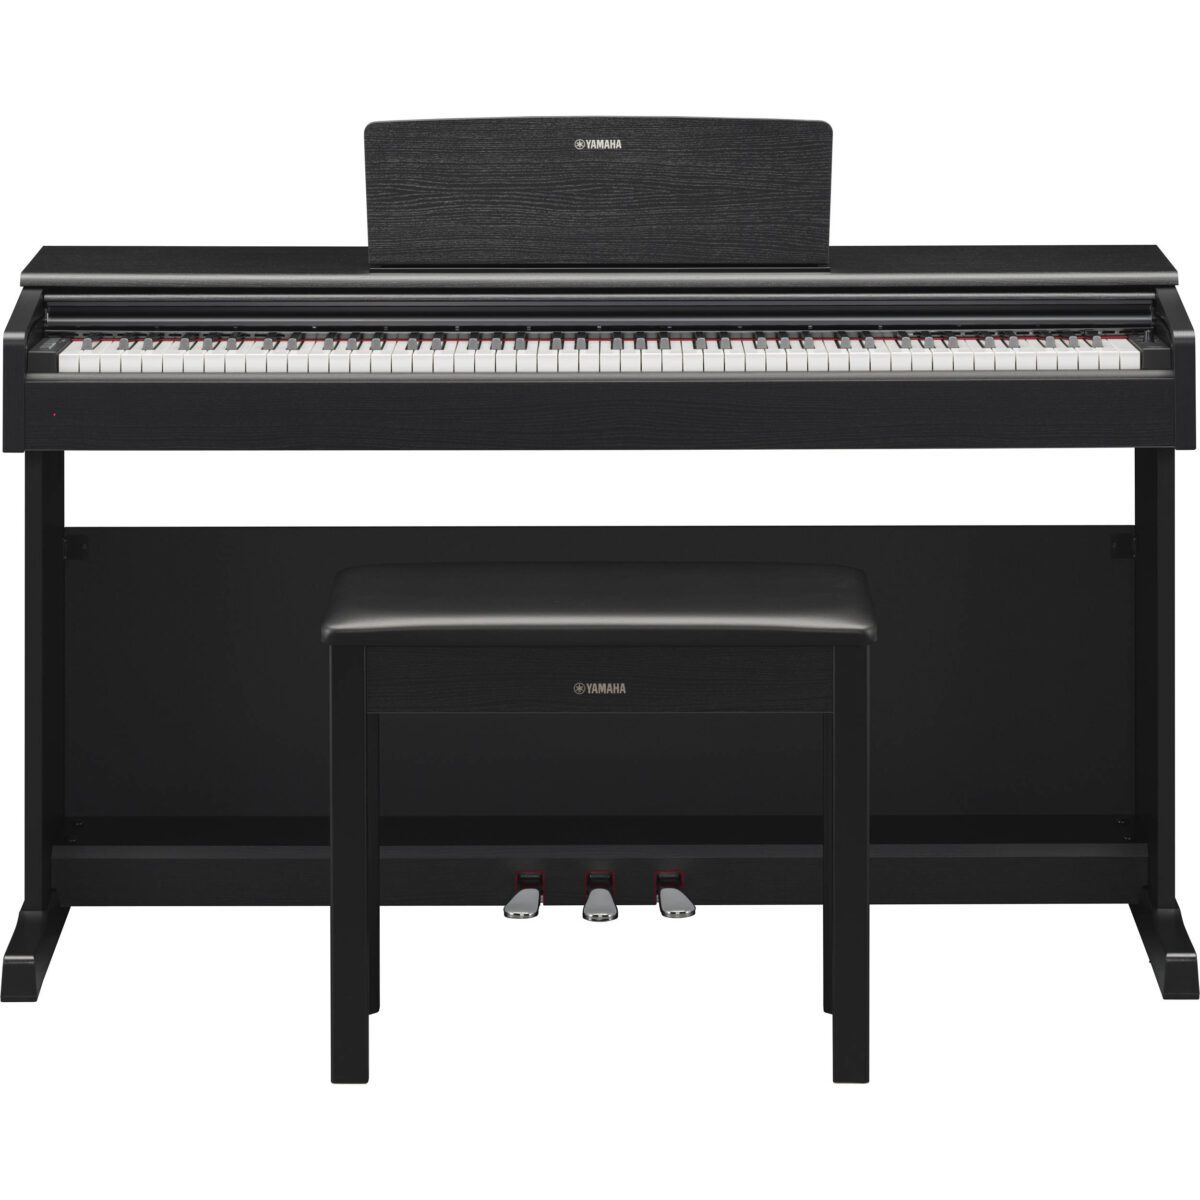 The black-walnut Arius YDP-144B Traditional Console Digital Piano with Bench from Yamaha is an 88-key digital piano featuring a Graded Hammer Standard keyboard designed to emulate the feel of an acoustic piano.